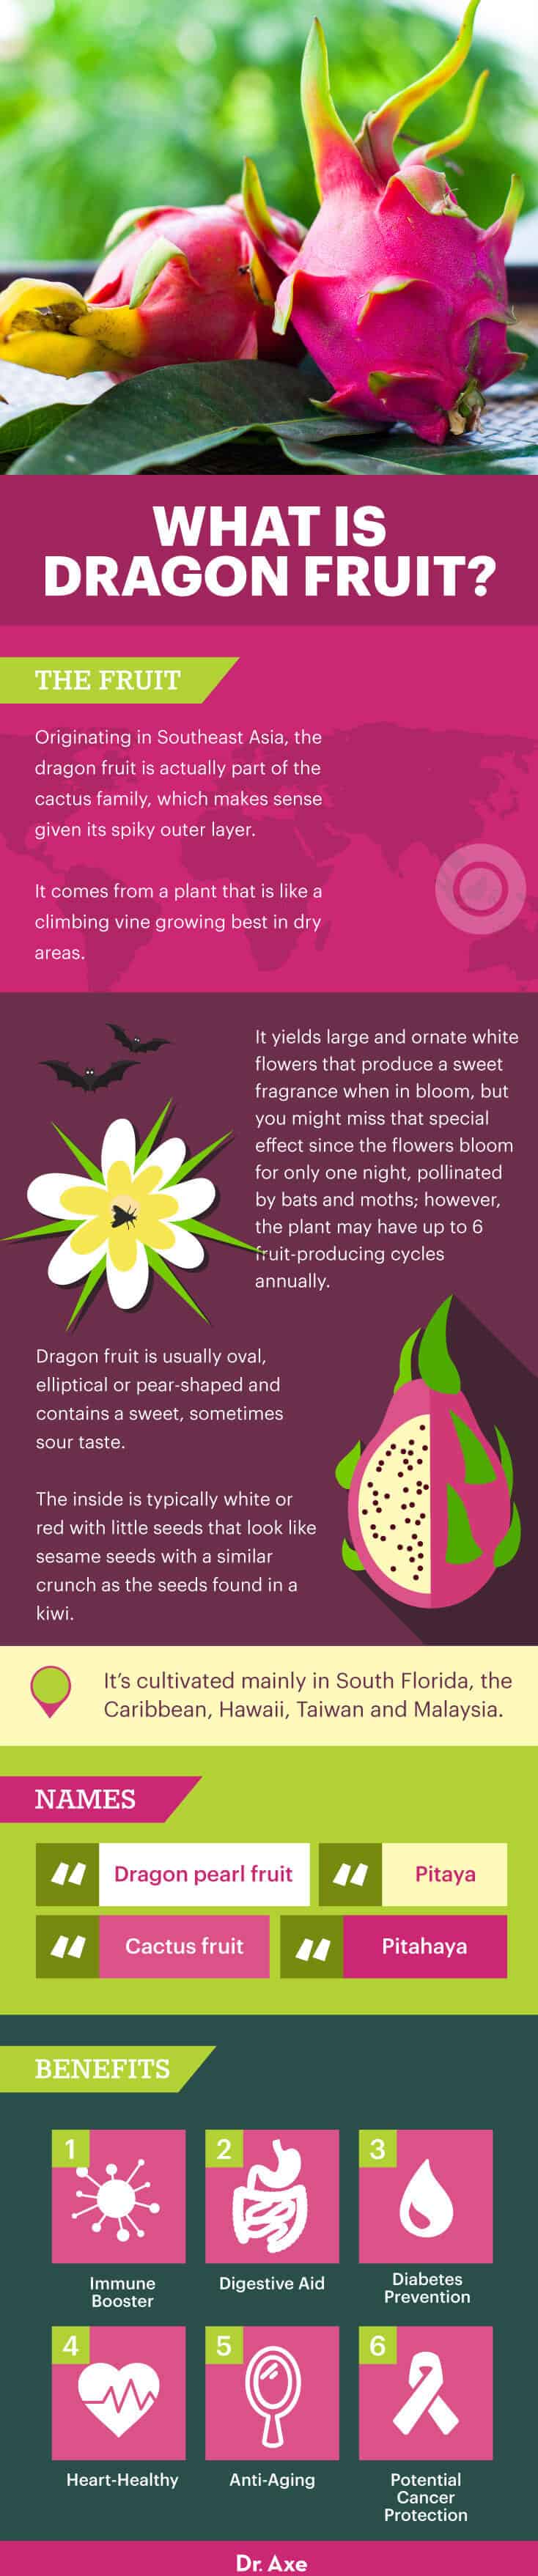 What is dragon fruit? - Dr. Axe